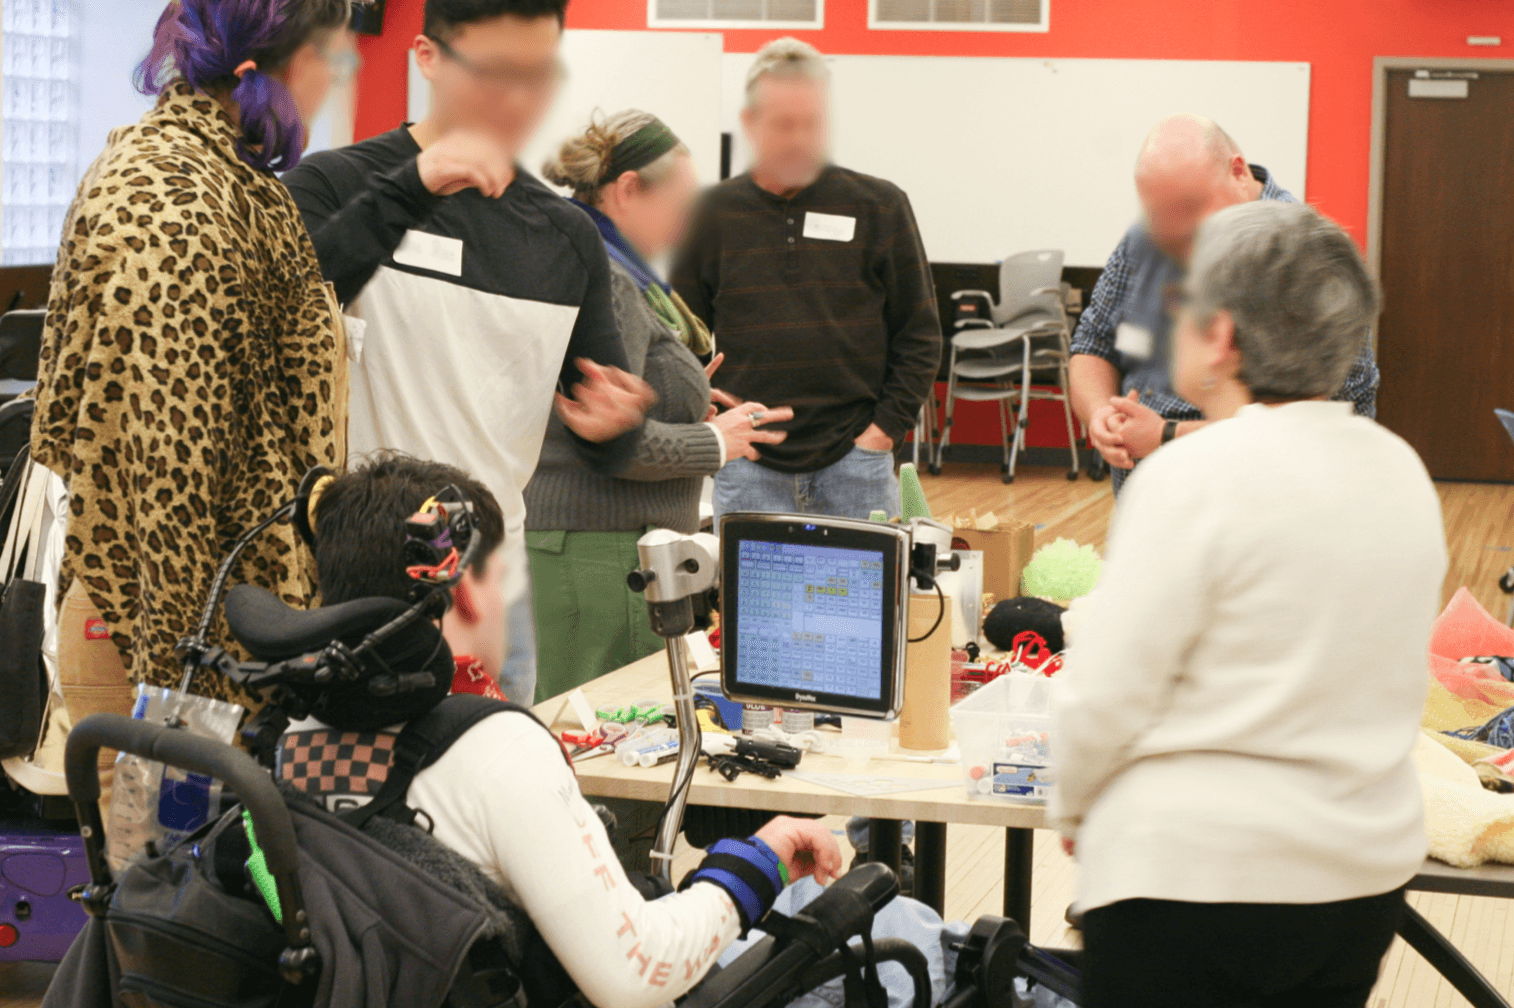 A photograph taken at a workshop with a person using an AAC device, her close conversational partner, and puppeteers. All participants stand around a table full of craft supplies and are engaged in coversation.